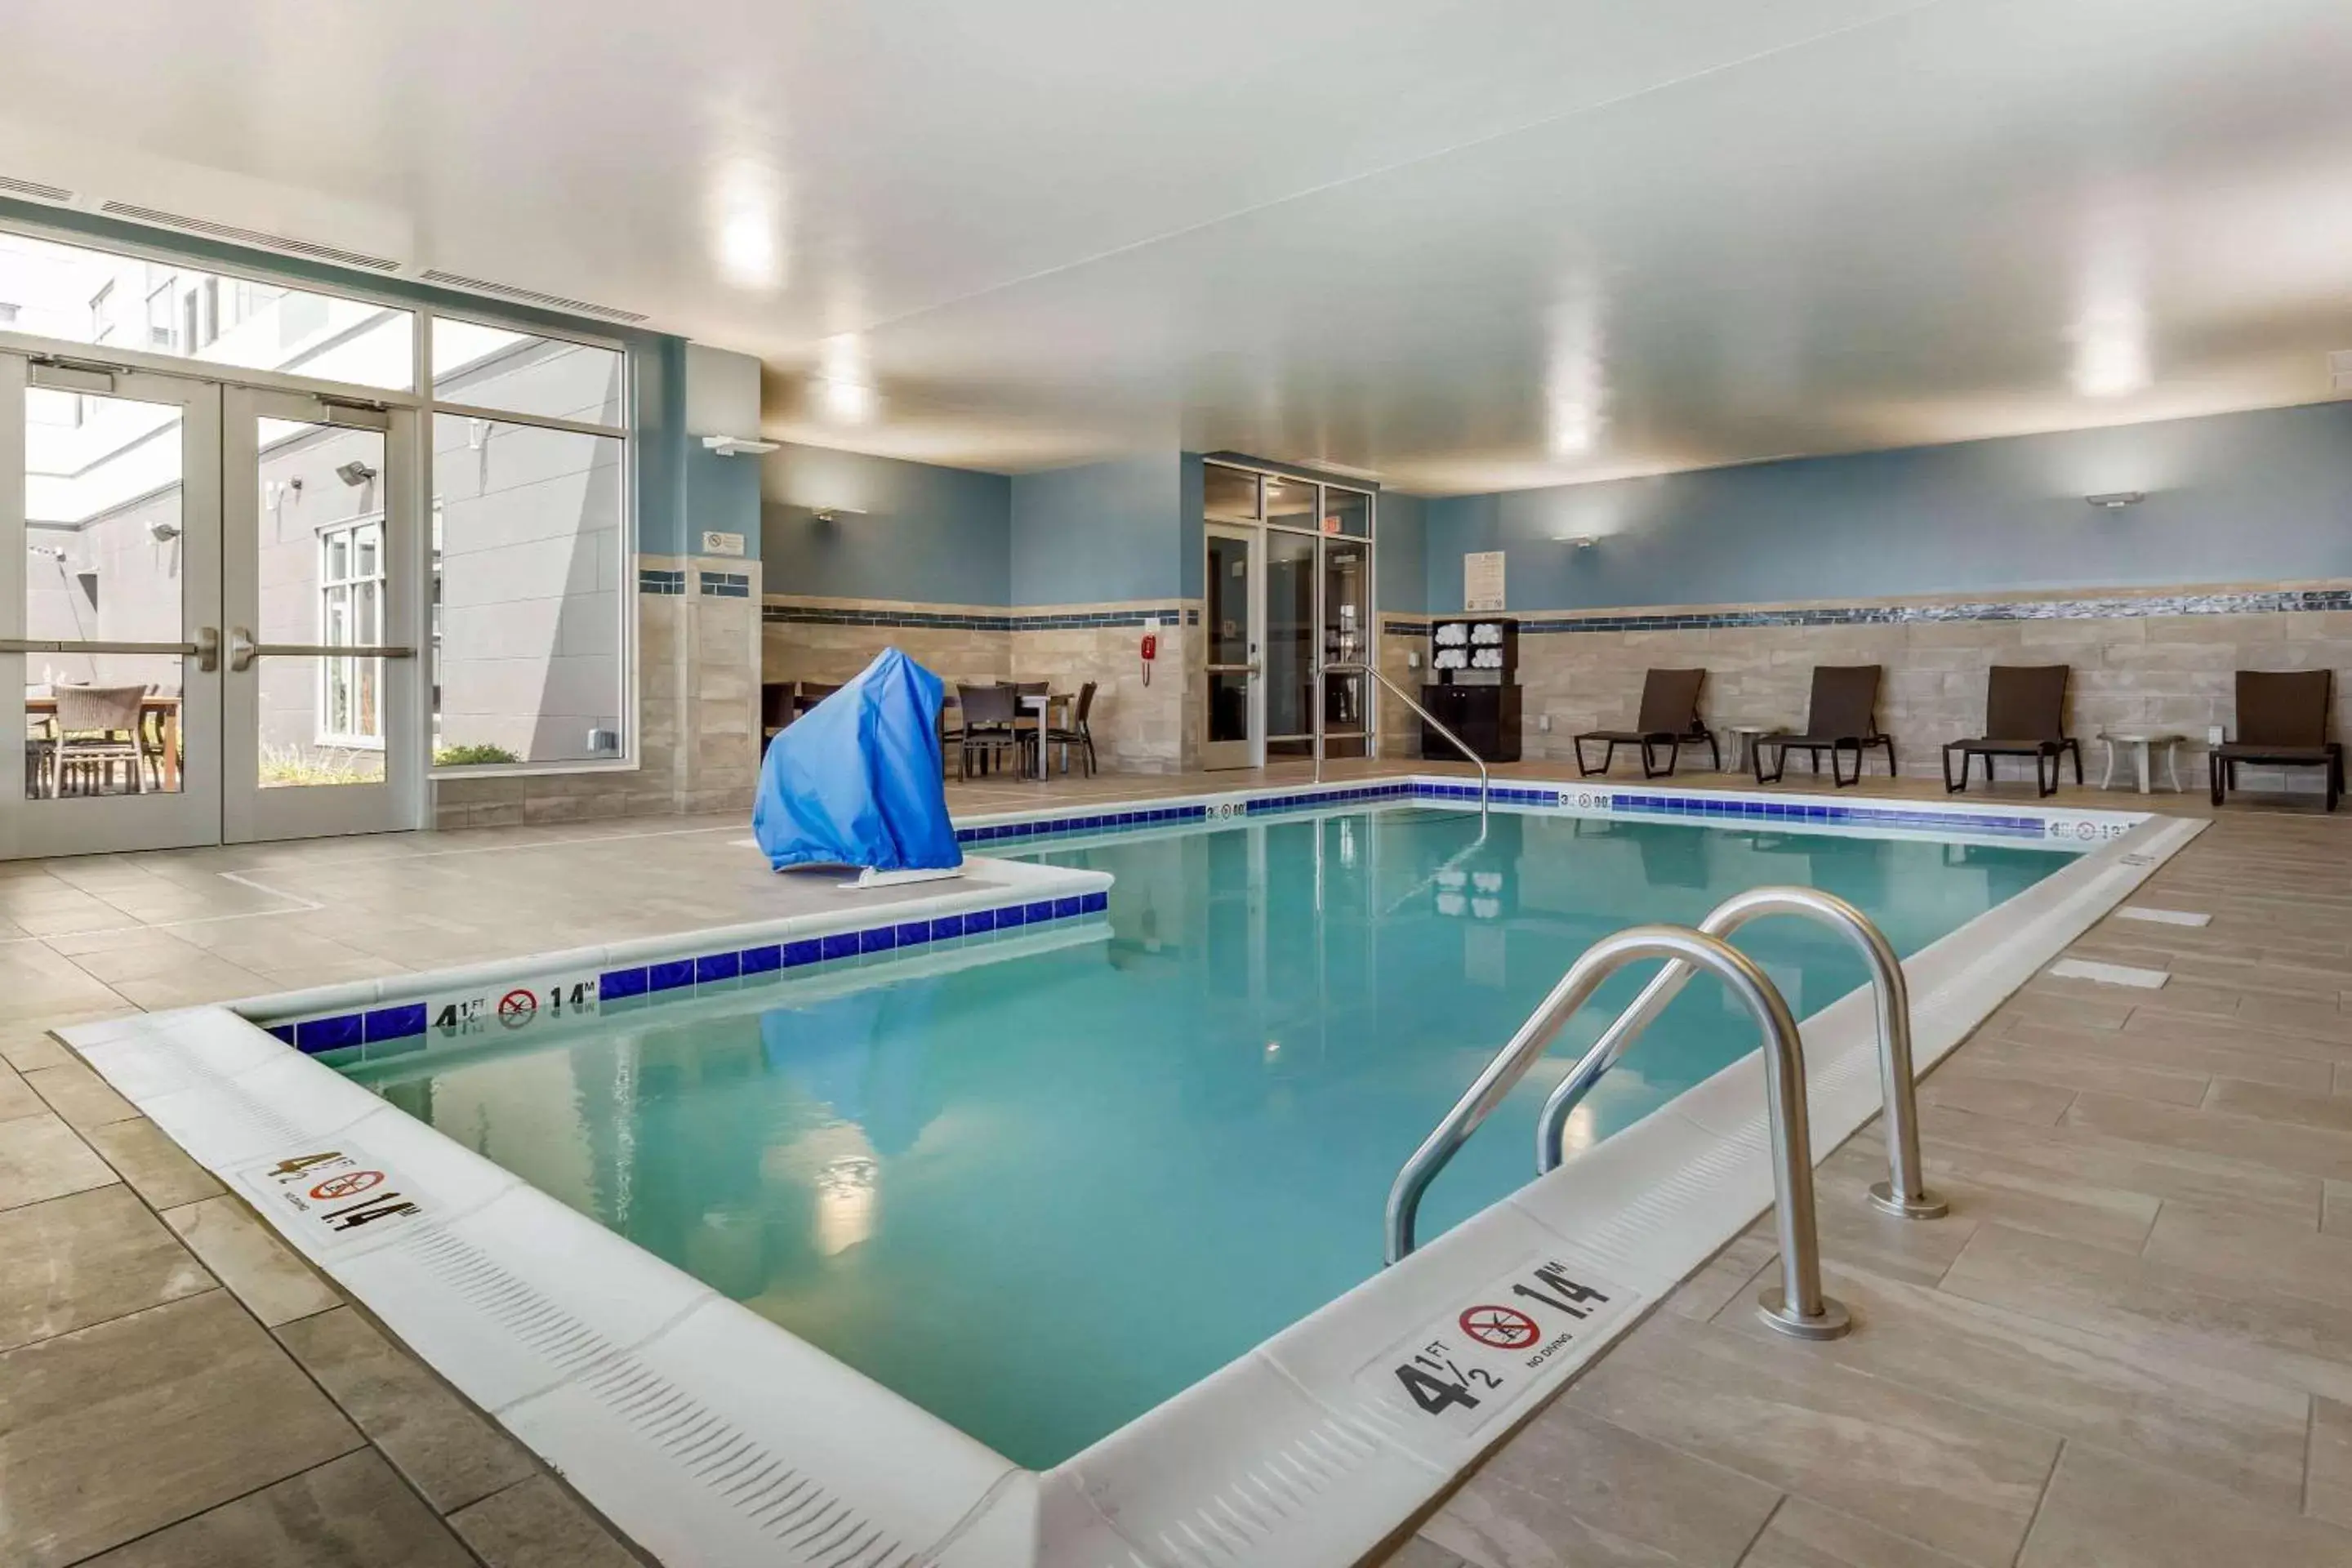 On site, Swimming Pool in Cambria Hotel Davenport Quad Cities